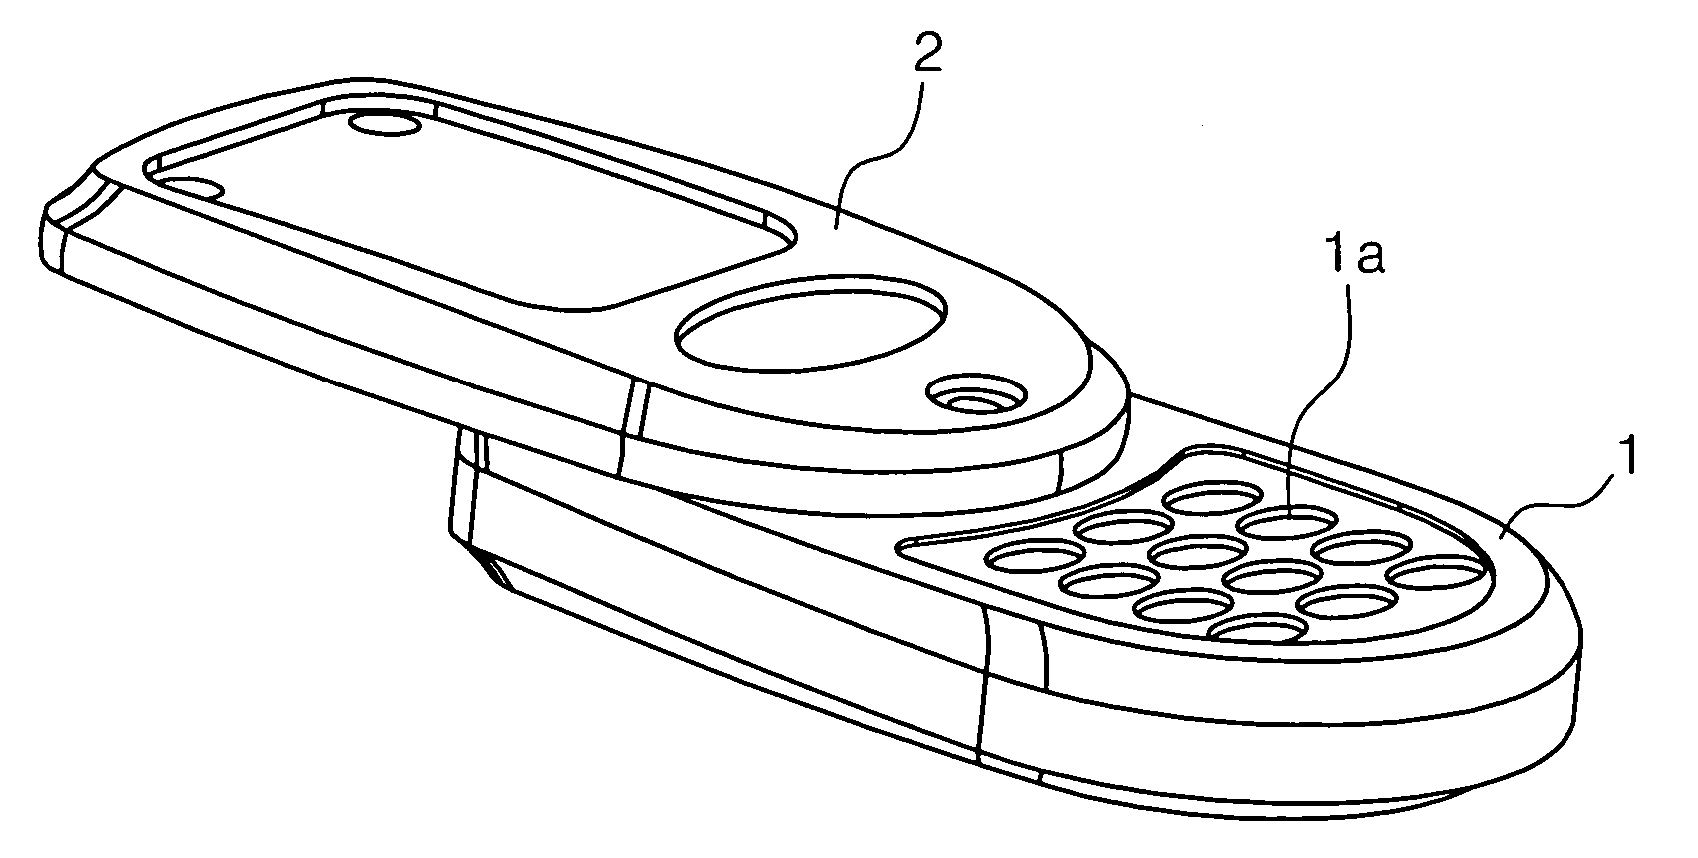 Apparatus for opening and closing cover of cellular phone